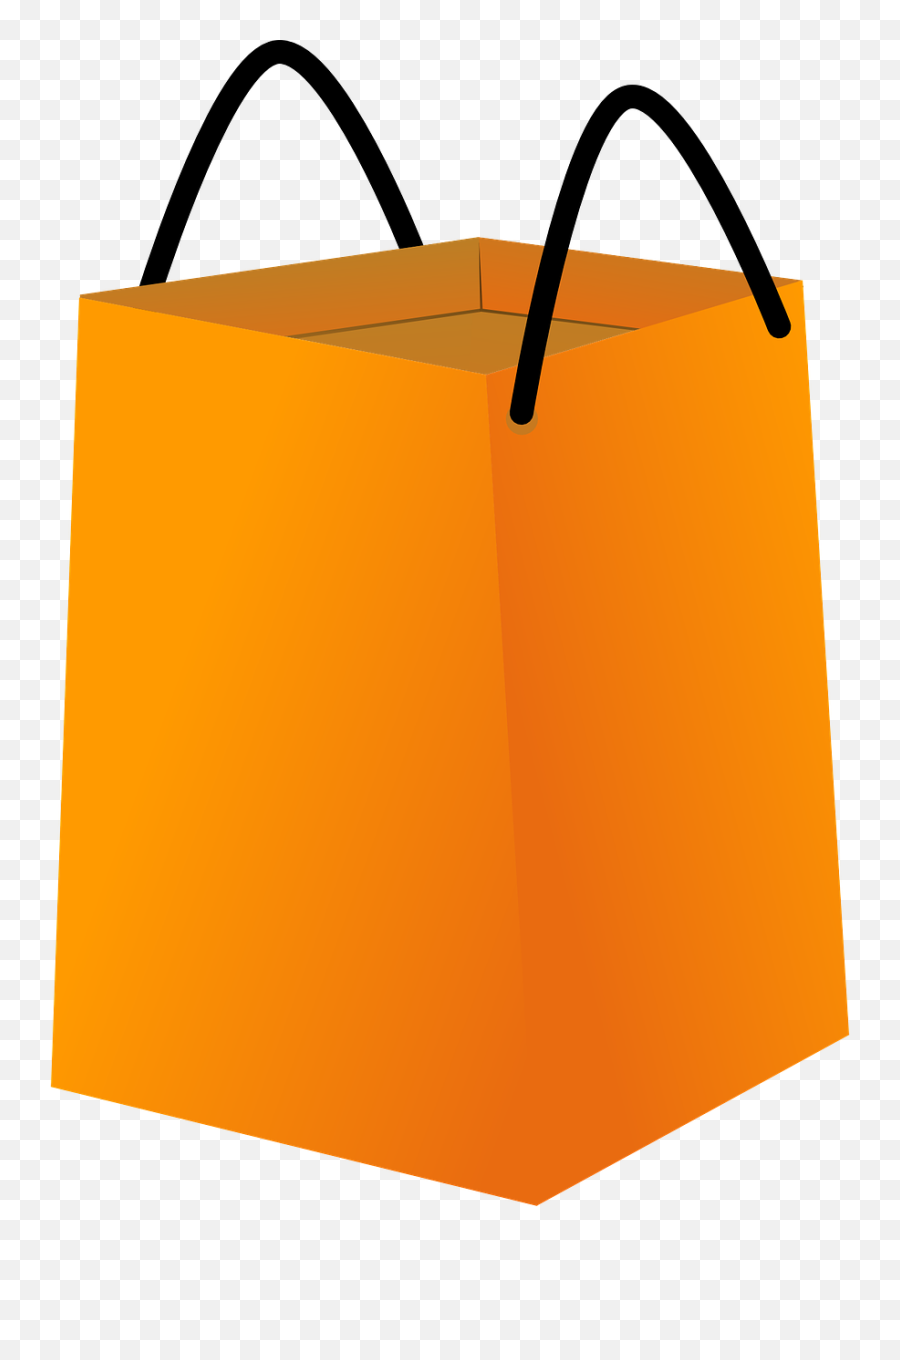 Shopping Bag With Black Handles Clip Art At Clkercom - Shopping Bag Orange Png Emoji,Shopping Bag Clipart